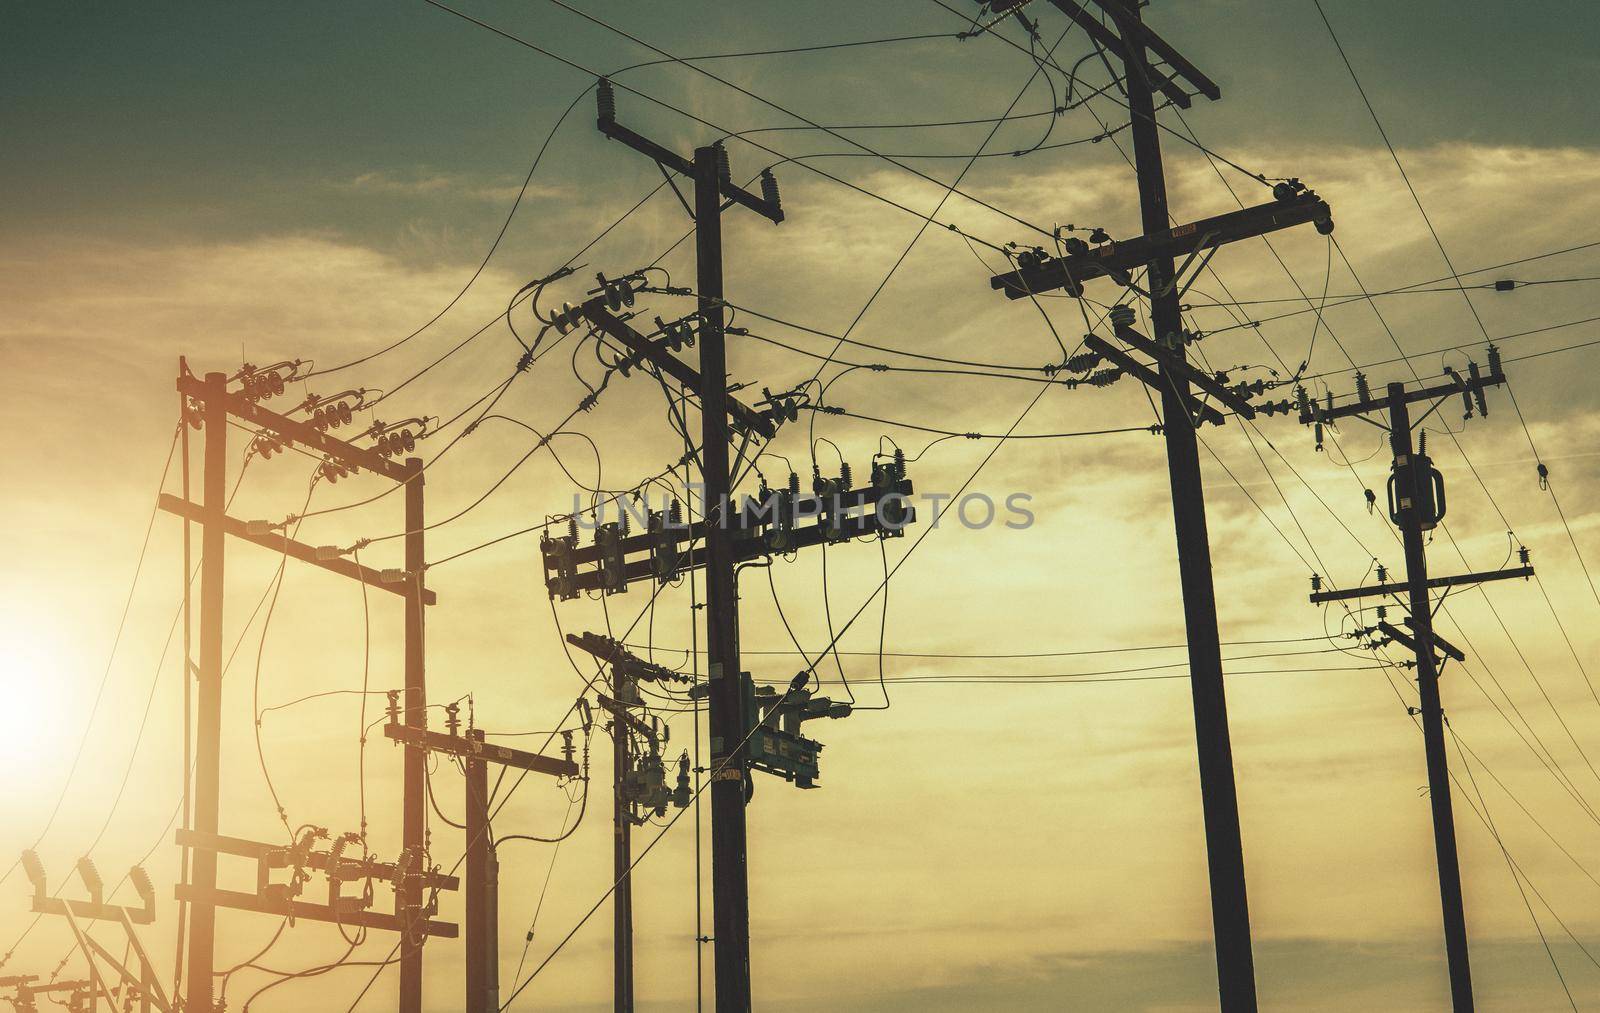 Wooden Electric Poles and High Voltage Infrastructure by welcomia